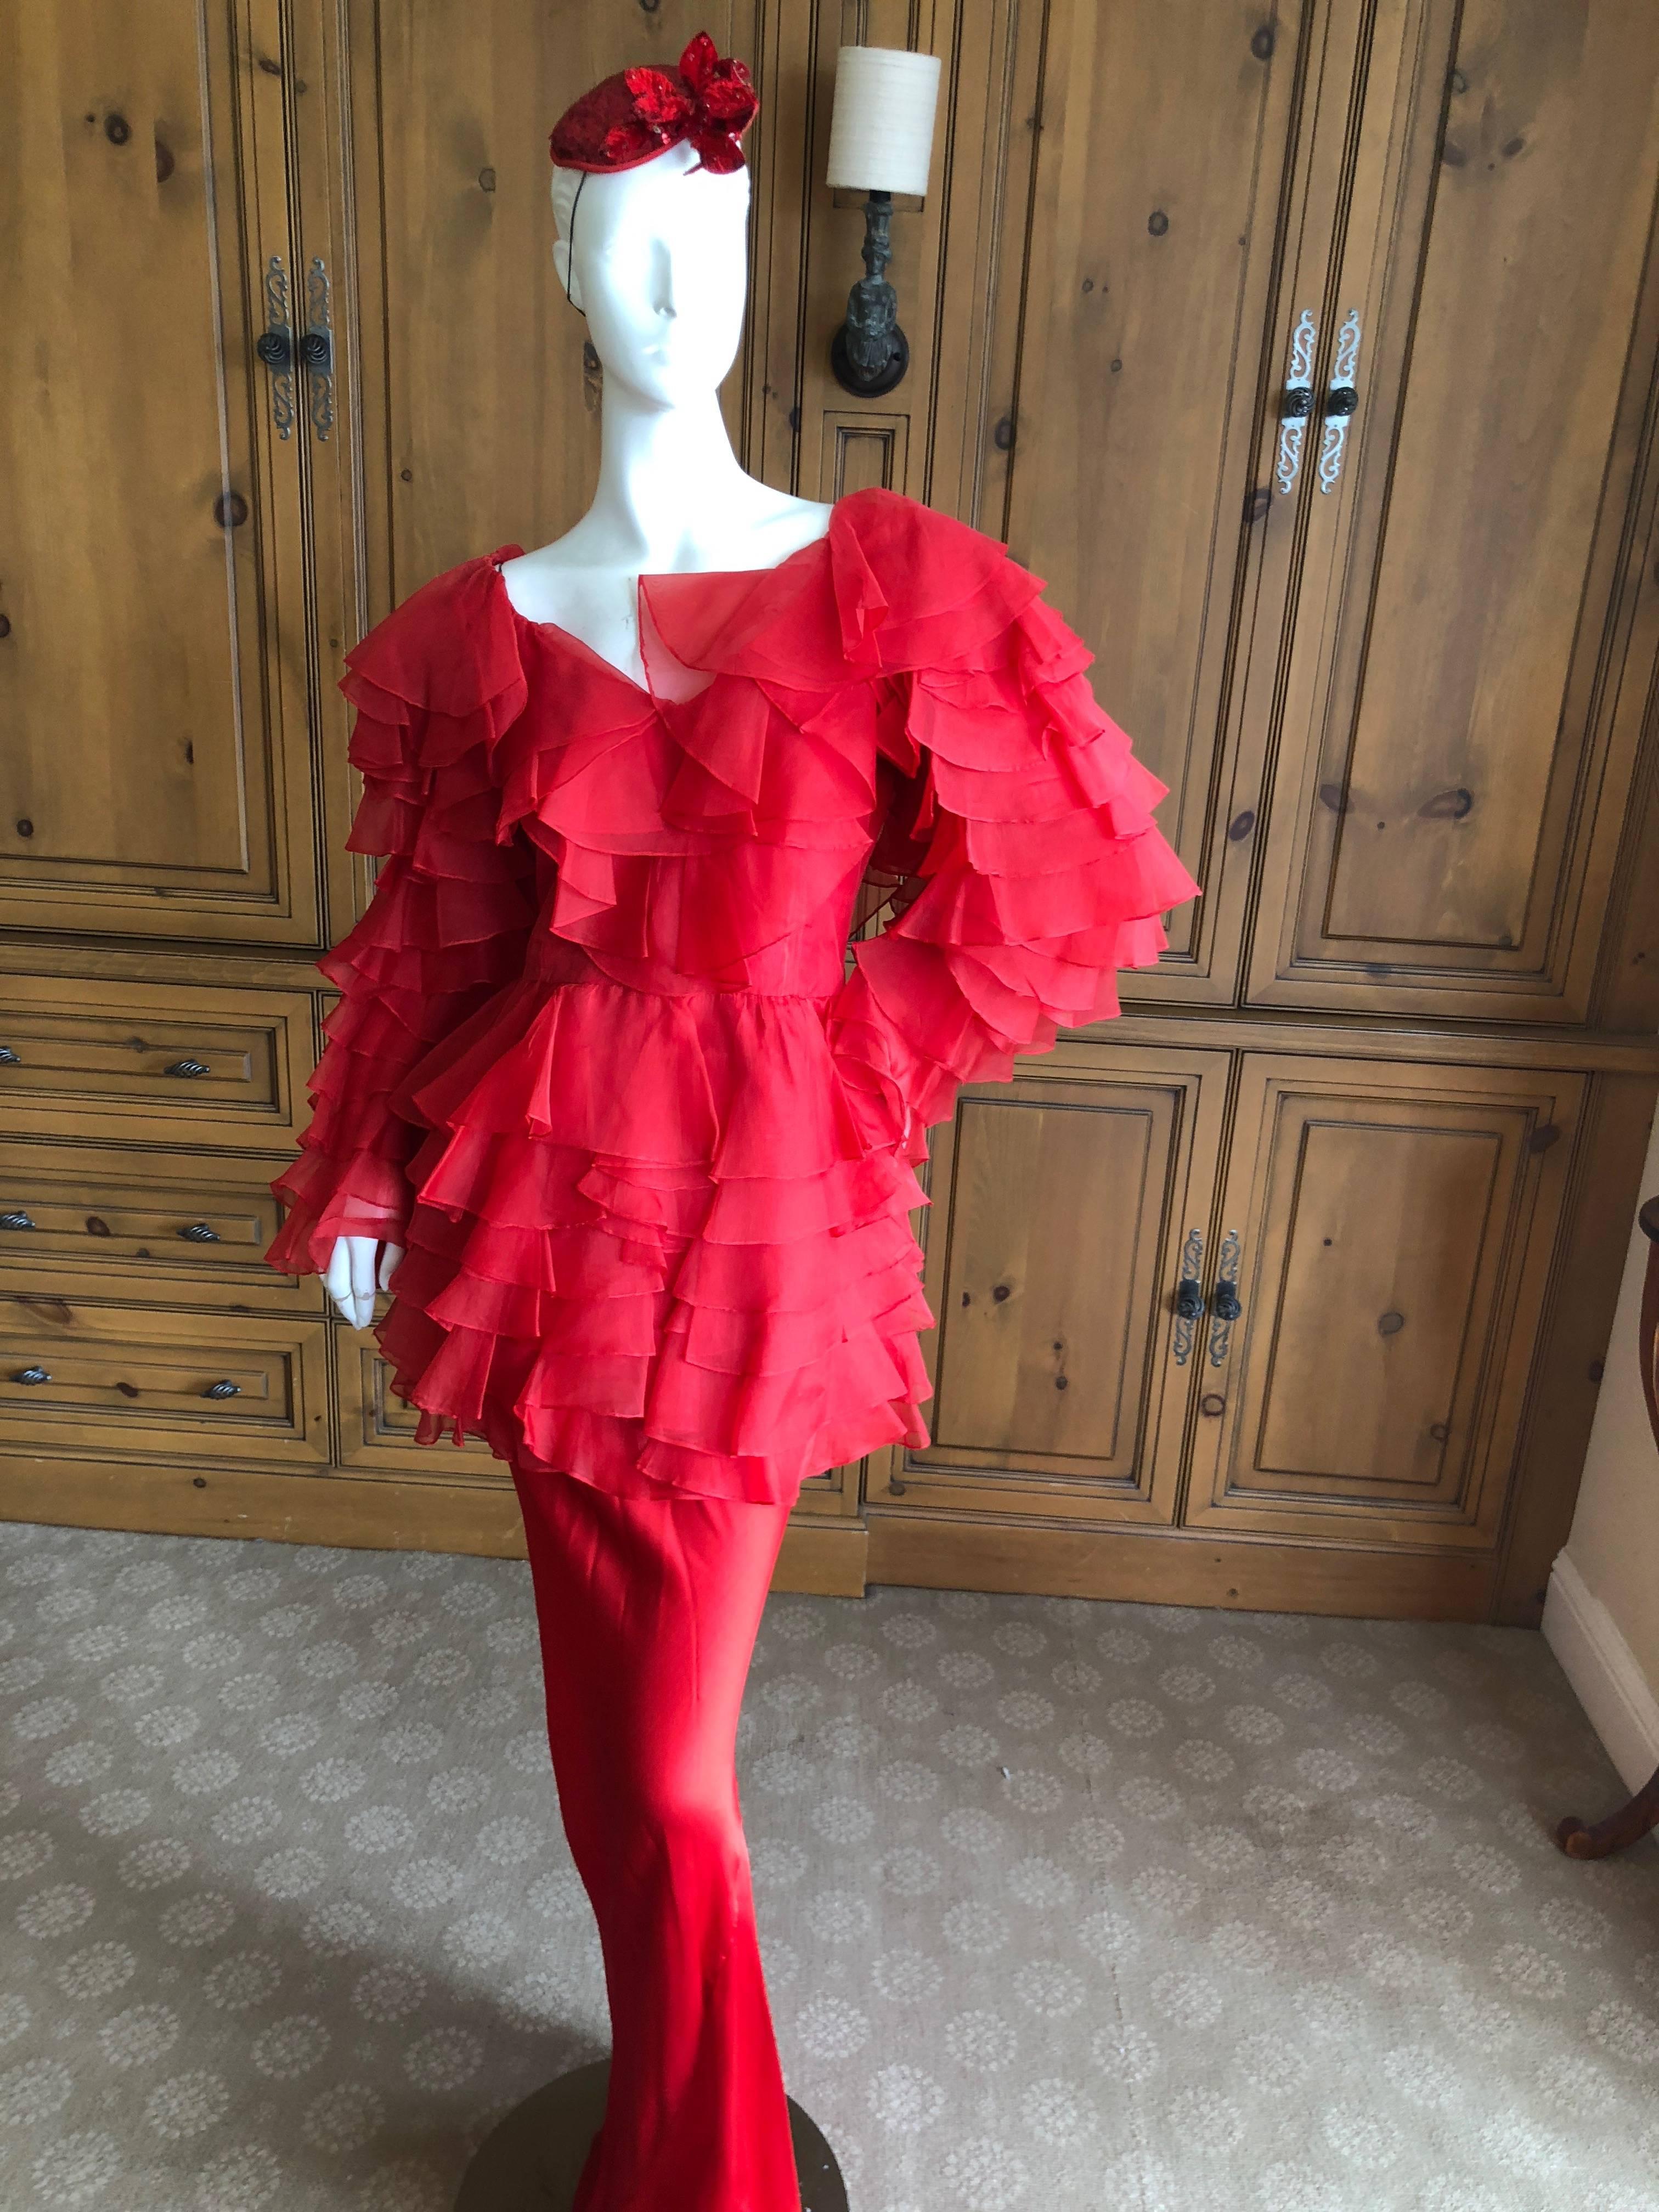 Cardinali 1970s Scarlet Red Ruffled Top and Bias Cut Silk Skirt with Fascinator For Sale 5